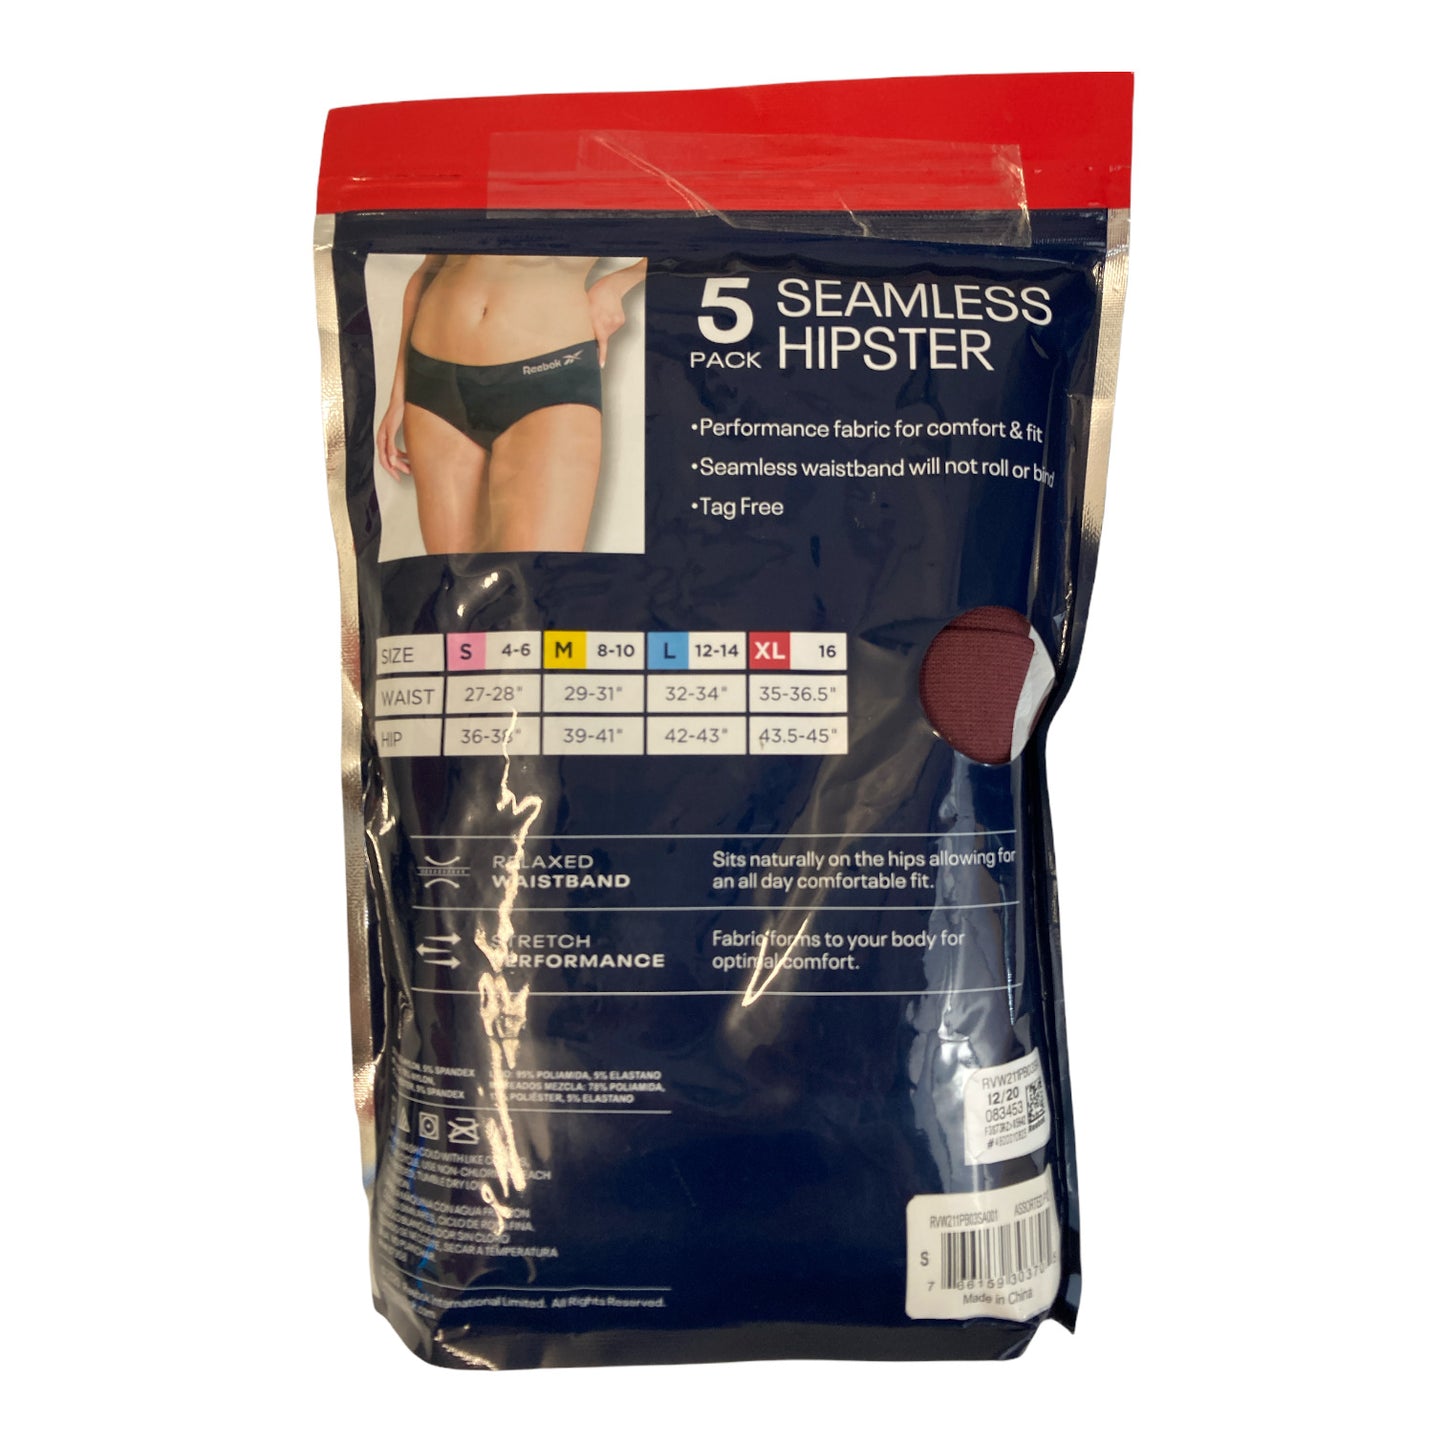 (5 Pack) Reebok Women's Stretch Performance Seamless Hipster Panties, Tag Free